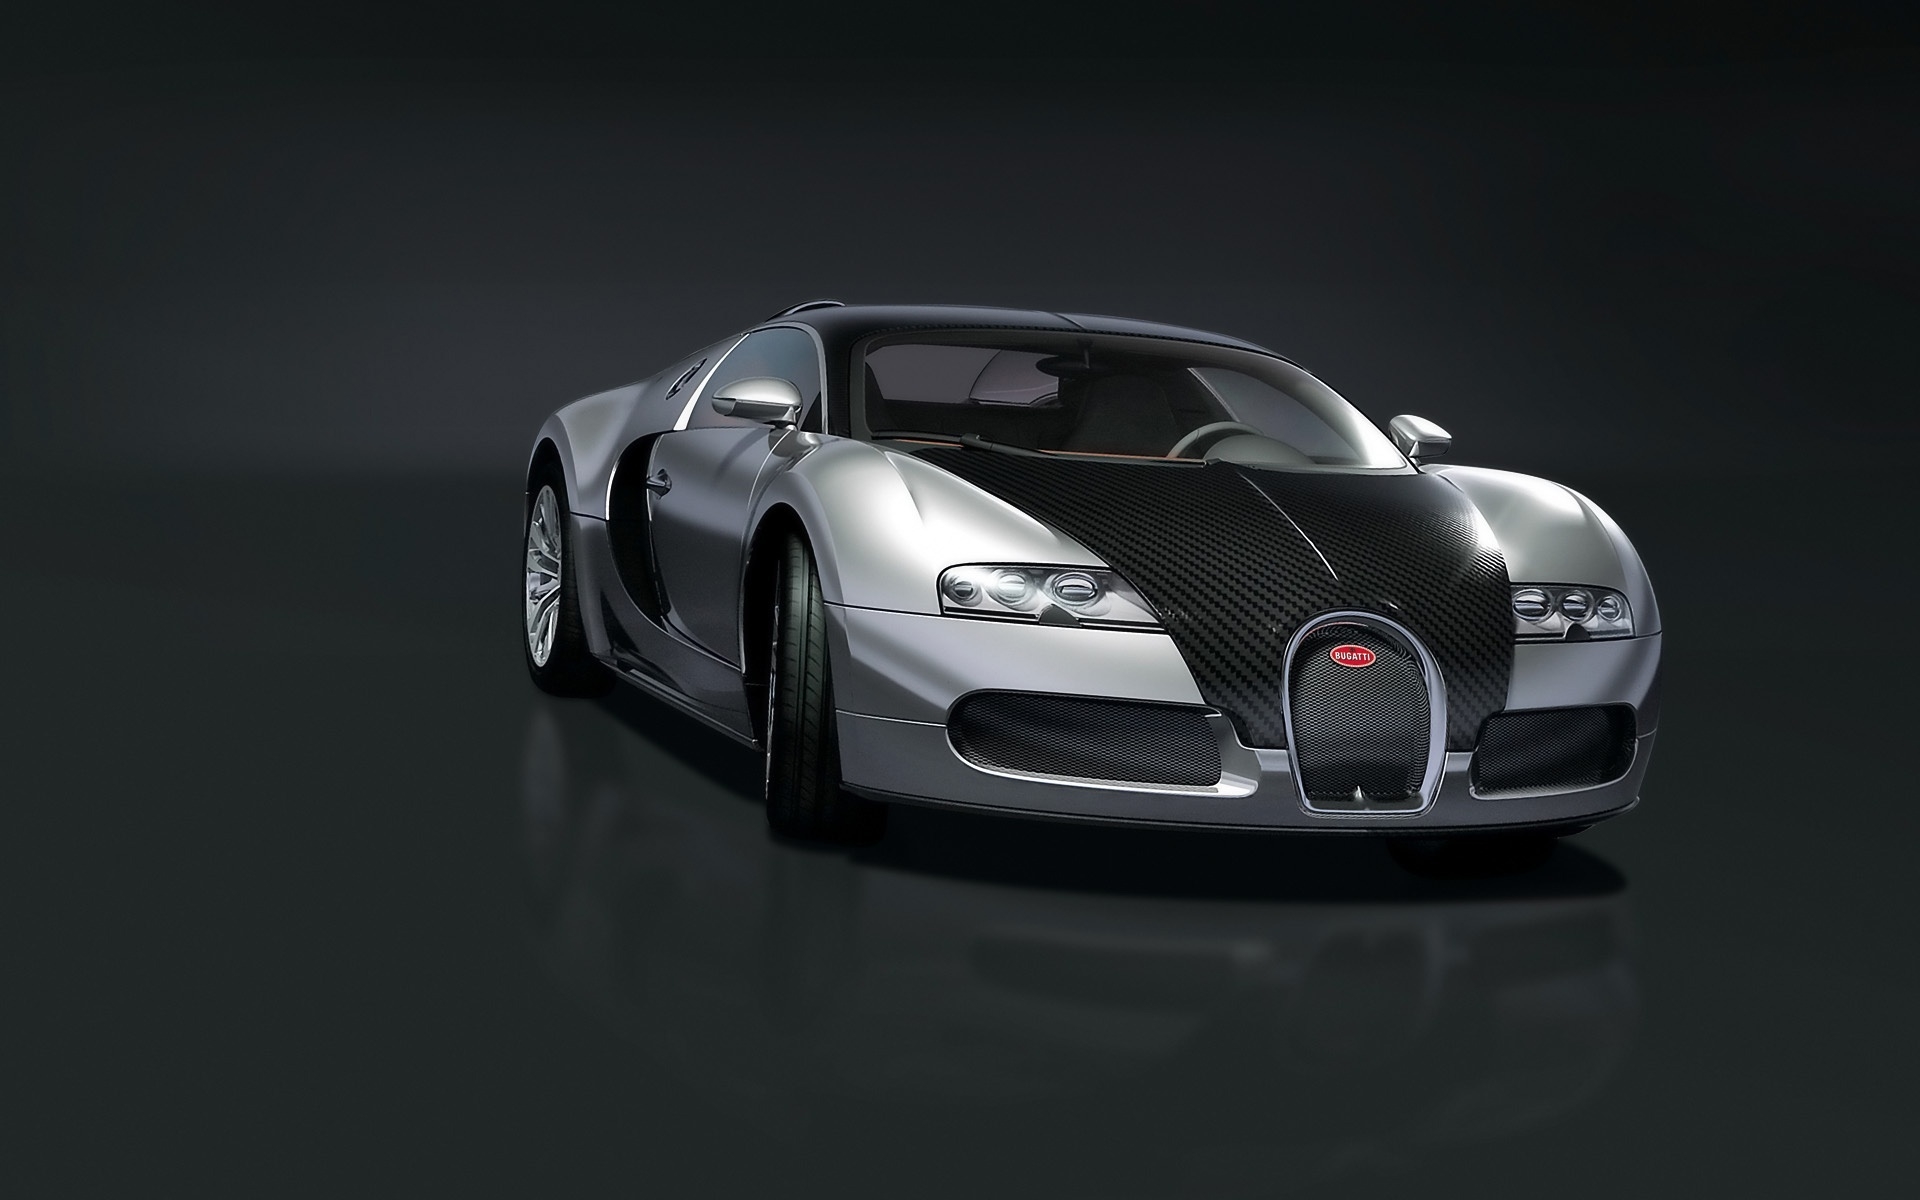 Bugatti EB 16.4 Veyron Pur Sang 2008 - Front Angle for 1920 x 1200 widescreen resolution